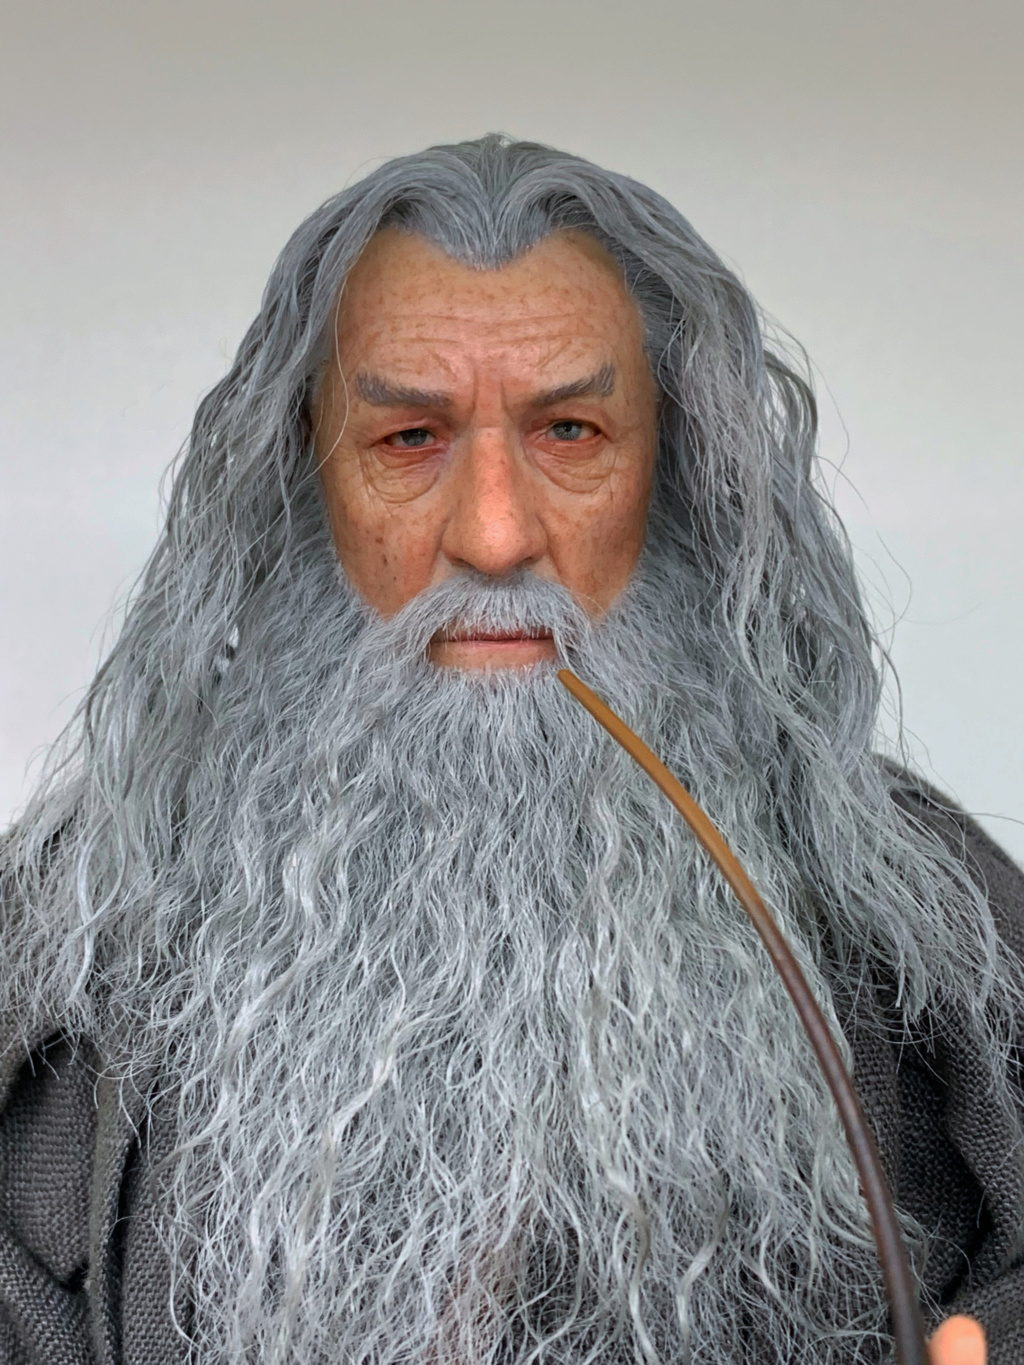 NEW PRODUCT: Queen Studios & INART: 1/6 The Lord of the Rings Gandalf (Grey Robe) Action Figure - Page 3 47698910